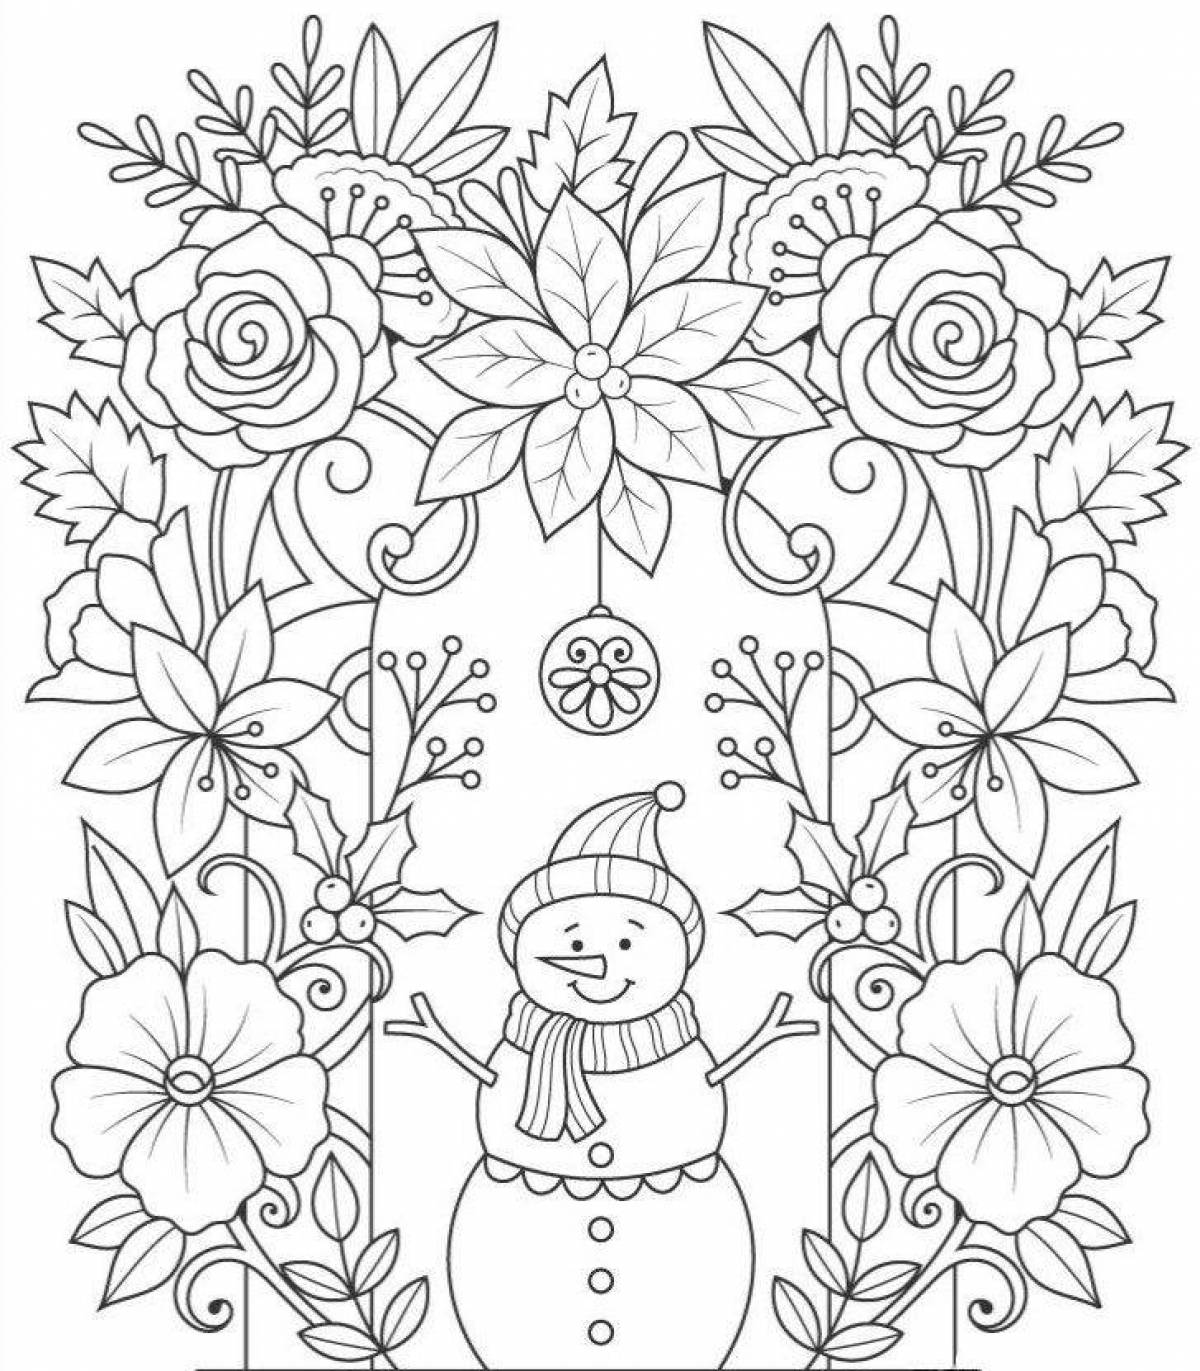 Outstanding Christmas complex coloring book